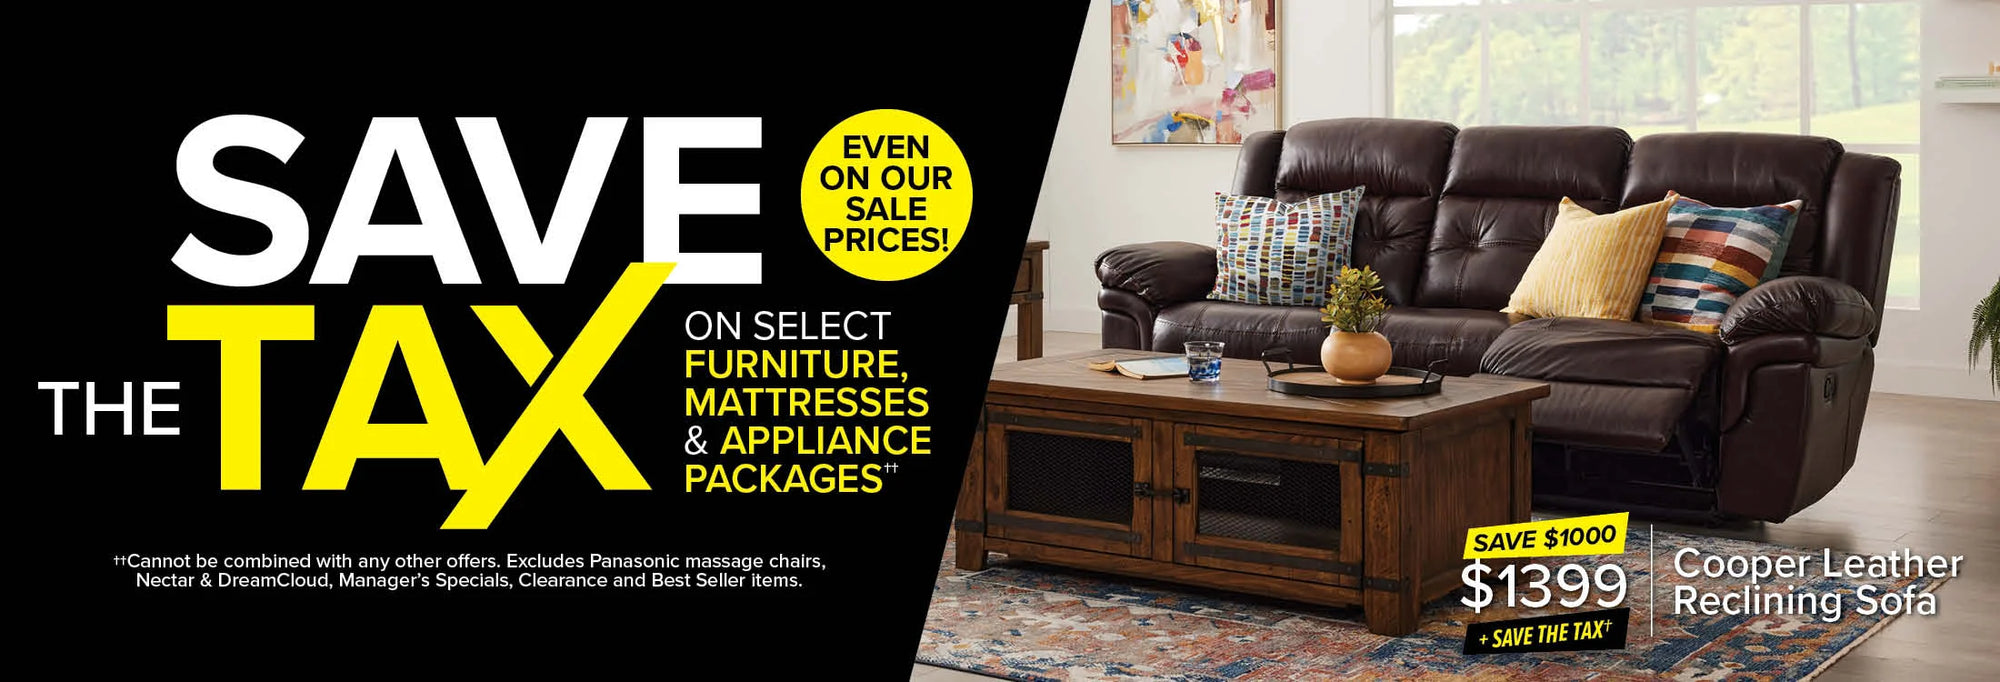 Save The Tax on select furniture, mattresses & appliance packages, even on our sale prices! Cannot be combined with other offers. Excludes Panasonic, Dreamcloud, Nectar, Best Seller and Clearance items.